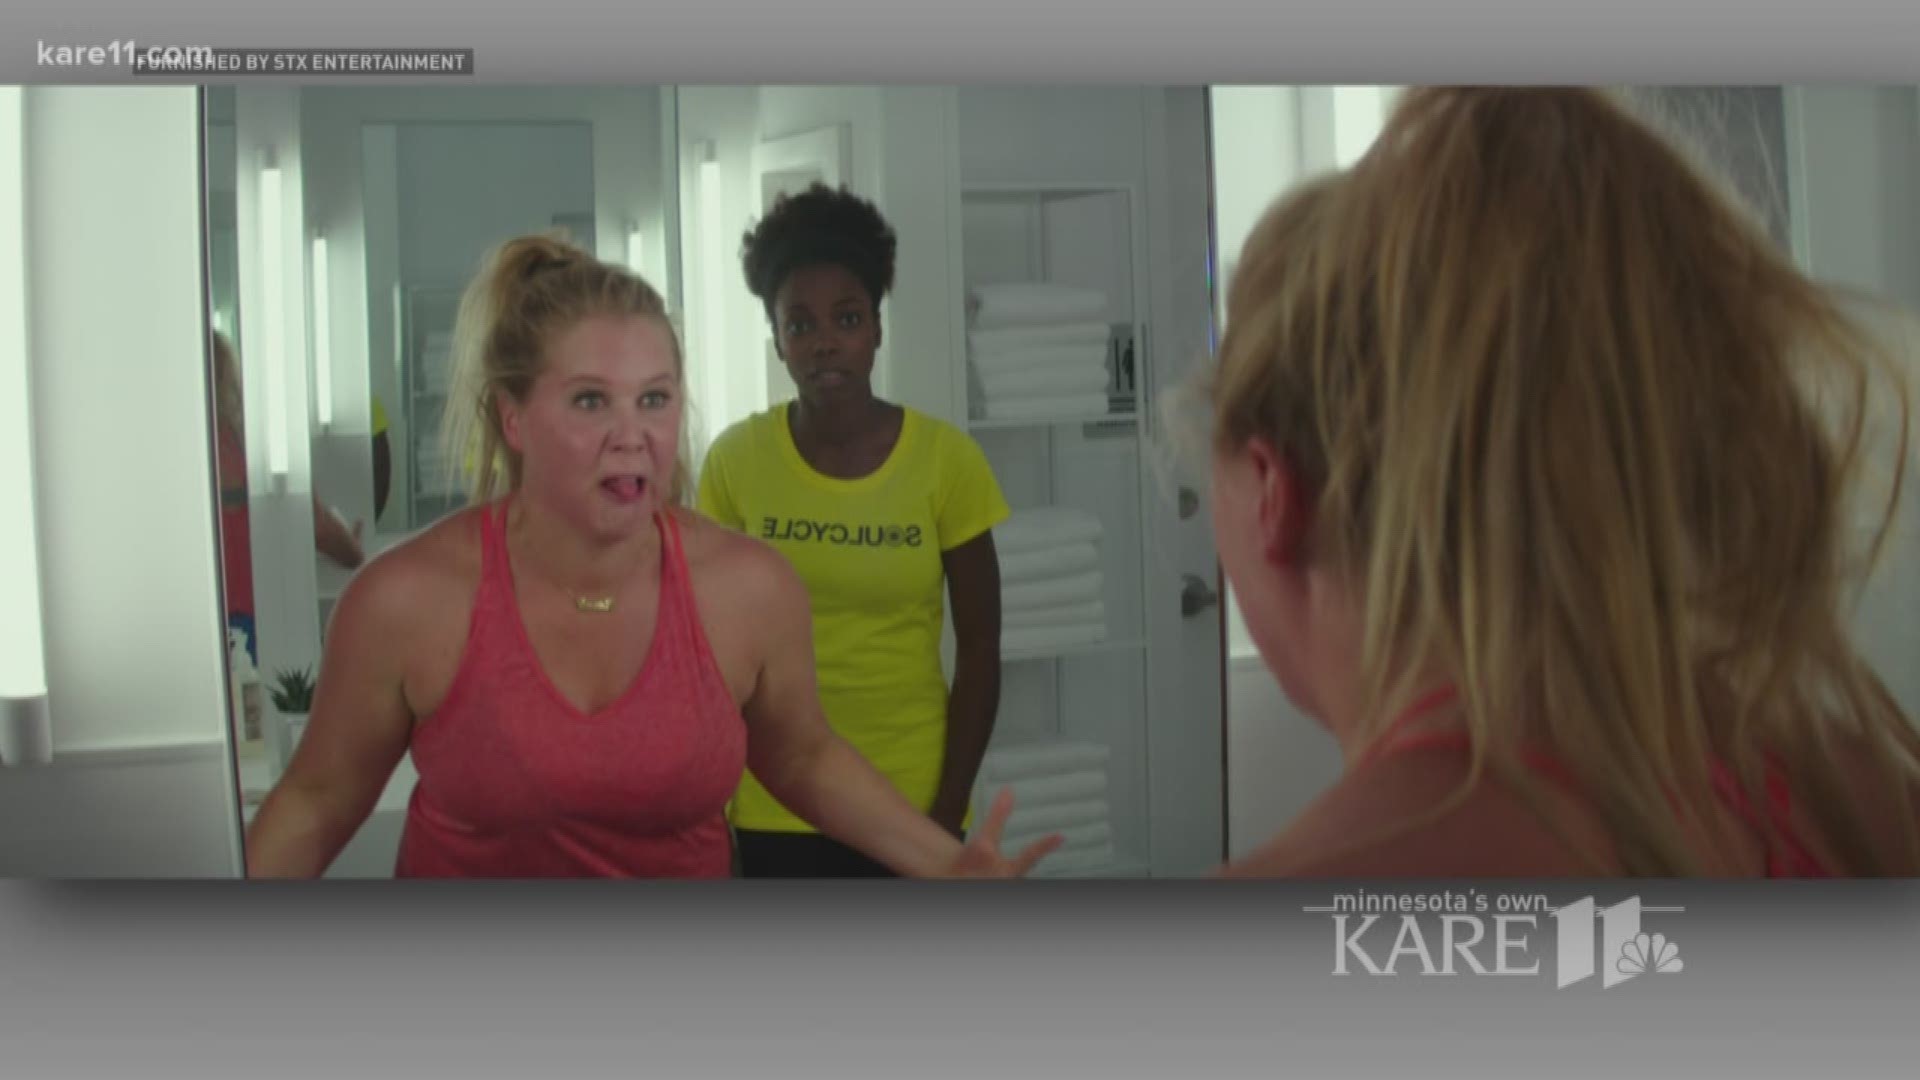 Amy Schumer returns to the comedy genre with "I Feel Pretty."